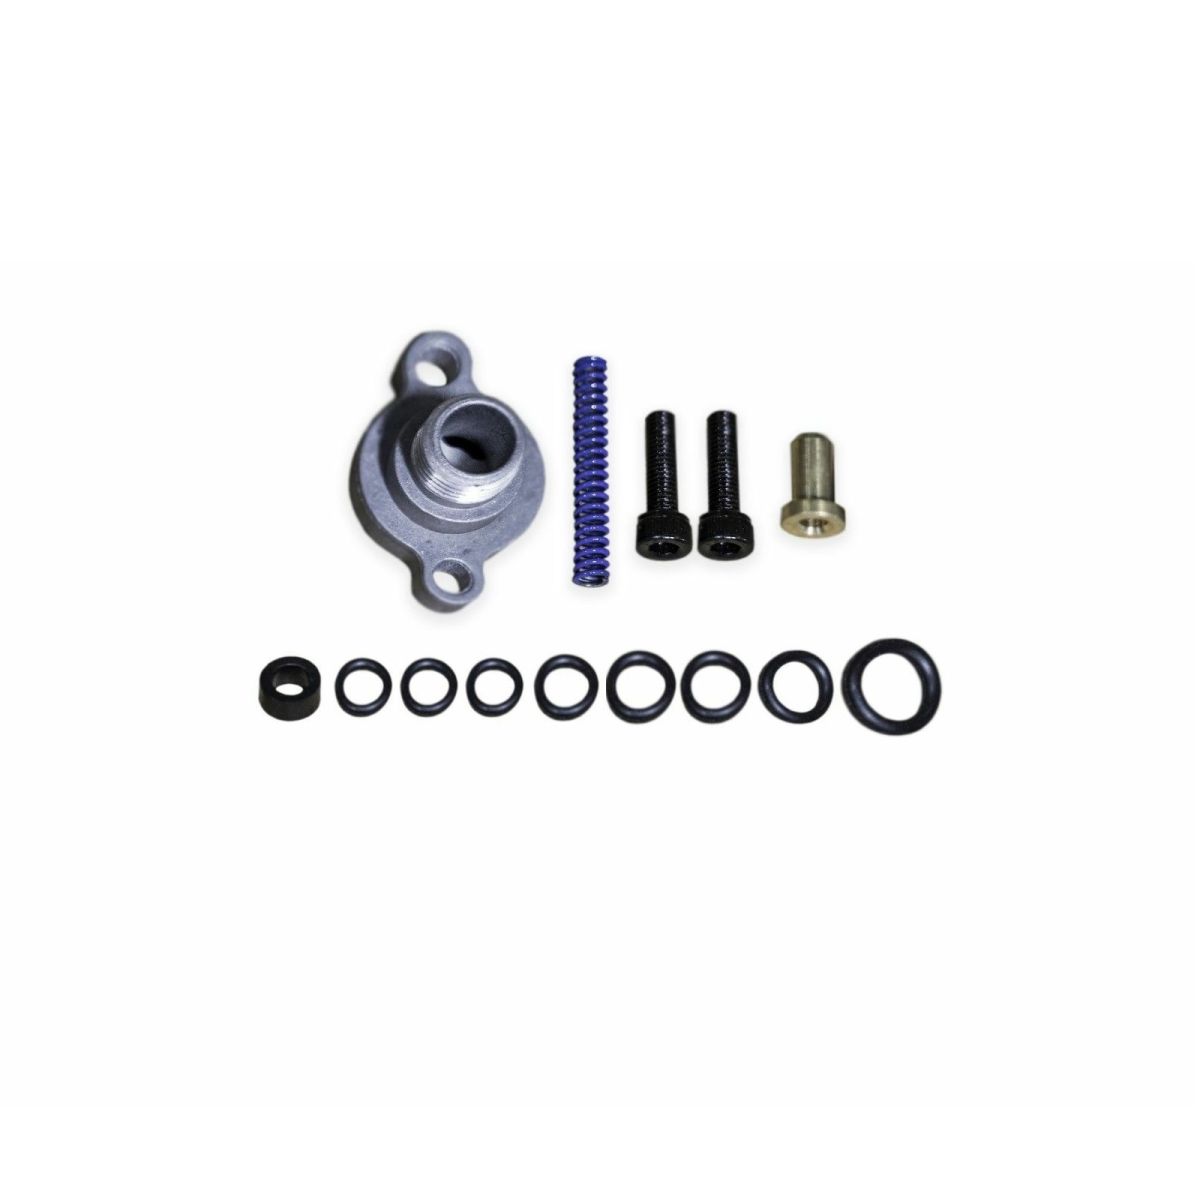 Rudy's Performance Parts - Rudy's Fuel Pressure Regulator Blue Spring Kit For 1999.5-2003 Ford Powerstroke